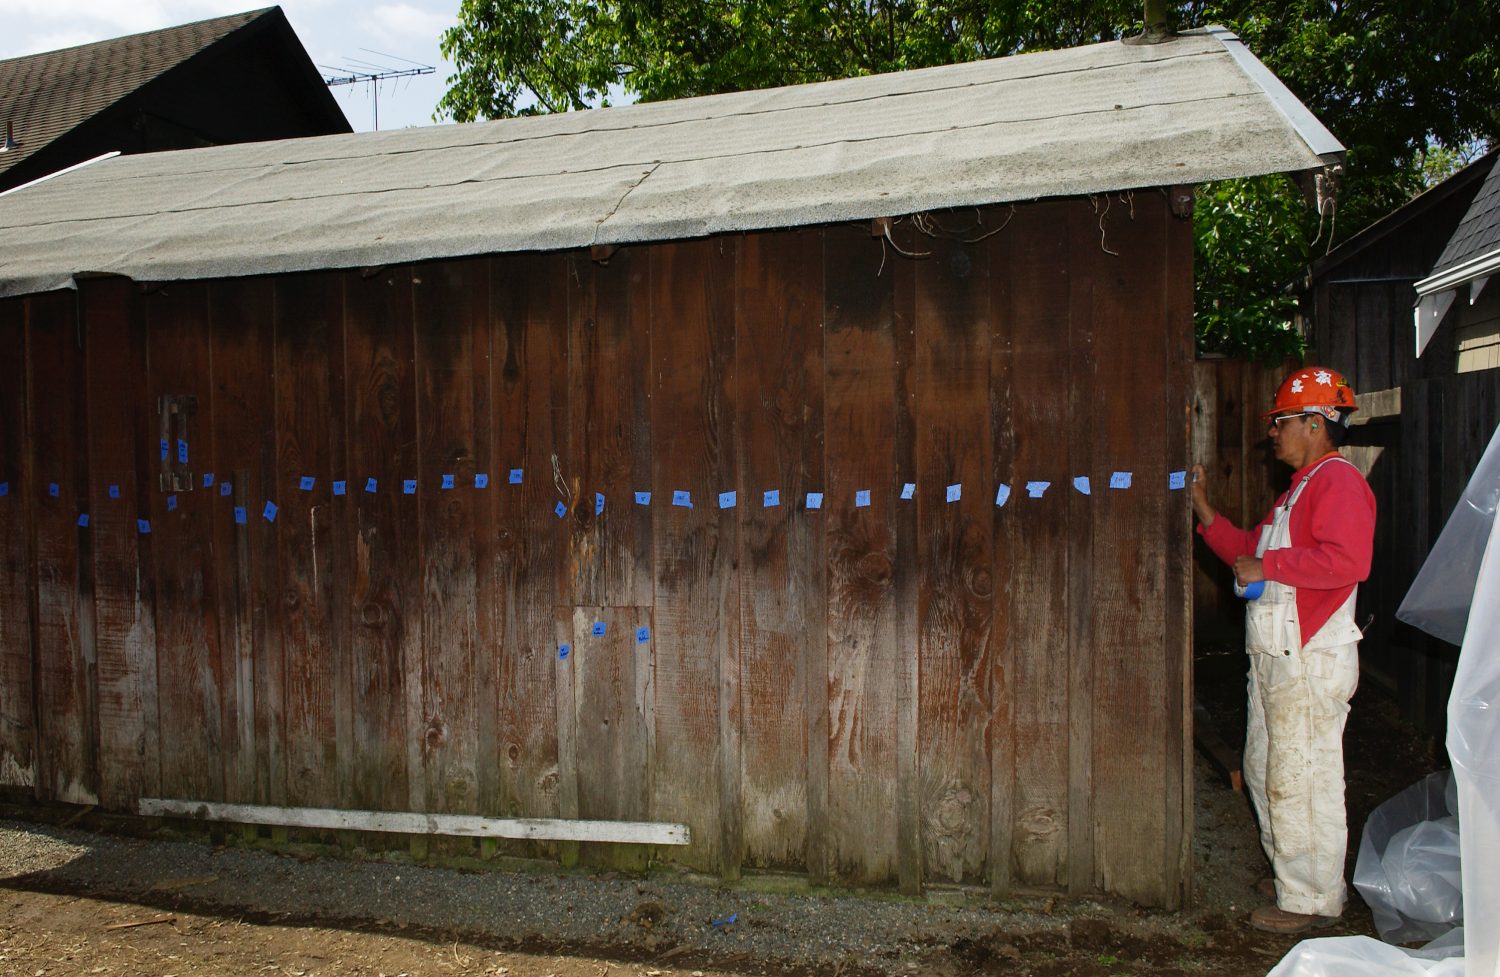 A worker labeling the boards of the garage with blue tape during the Addison Avenue restoration.